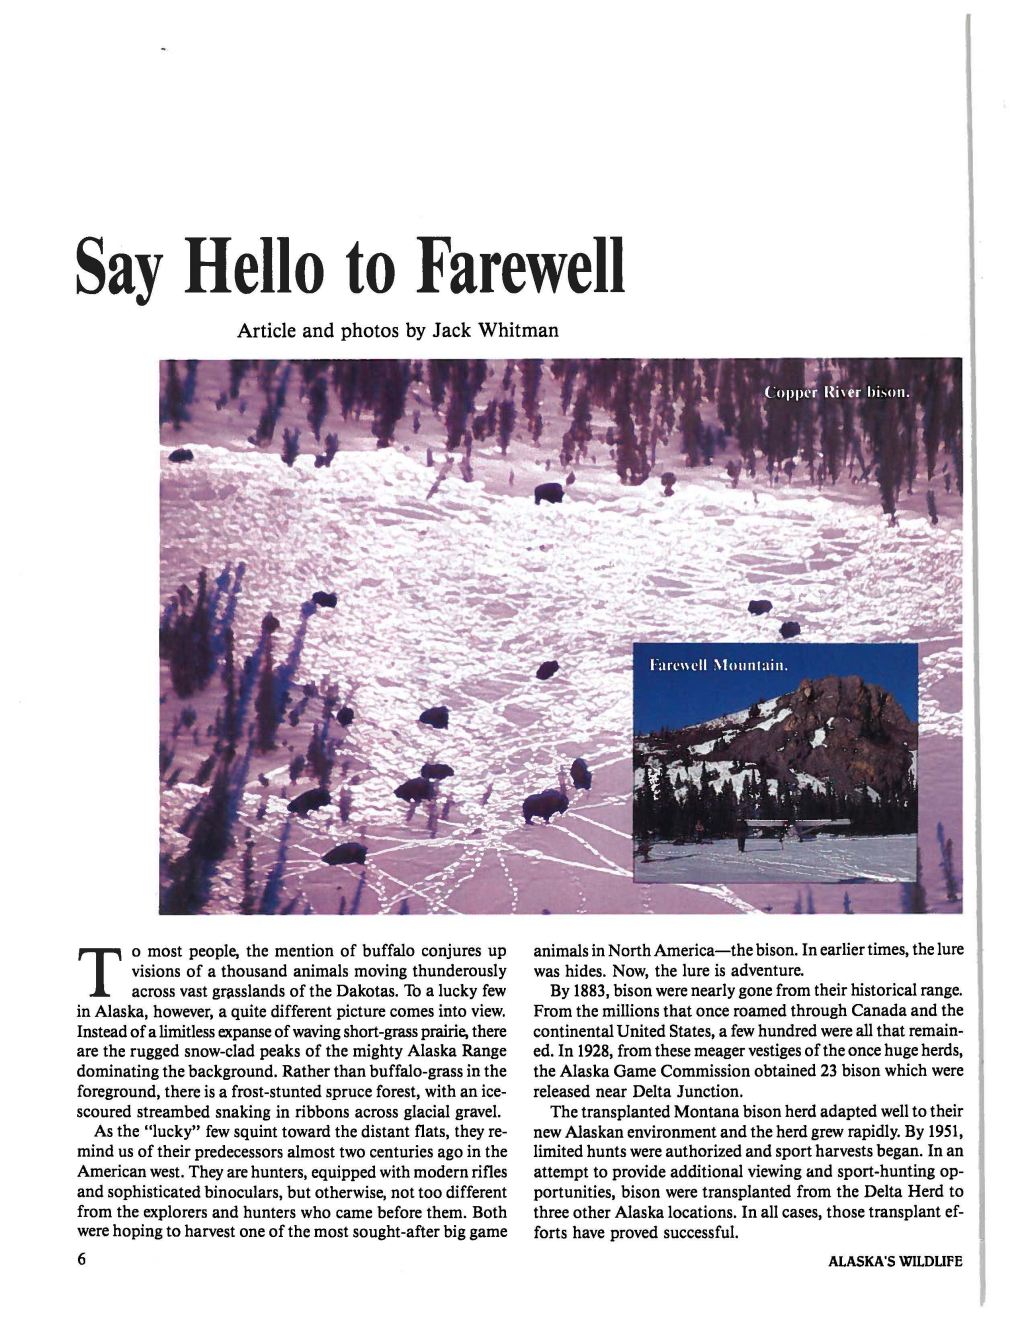 Say Hello to Farewell Article and Photos by Jack Whitman